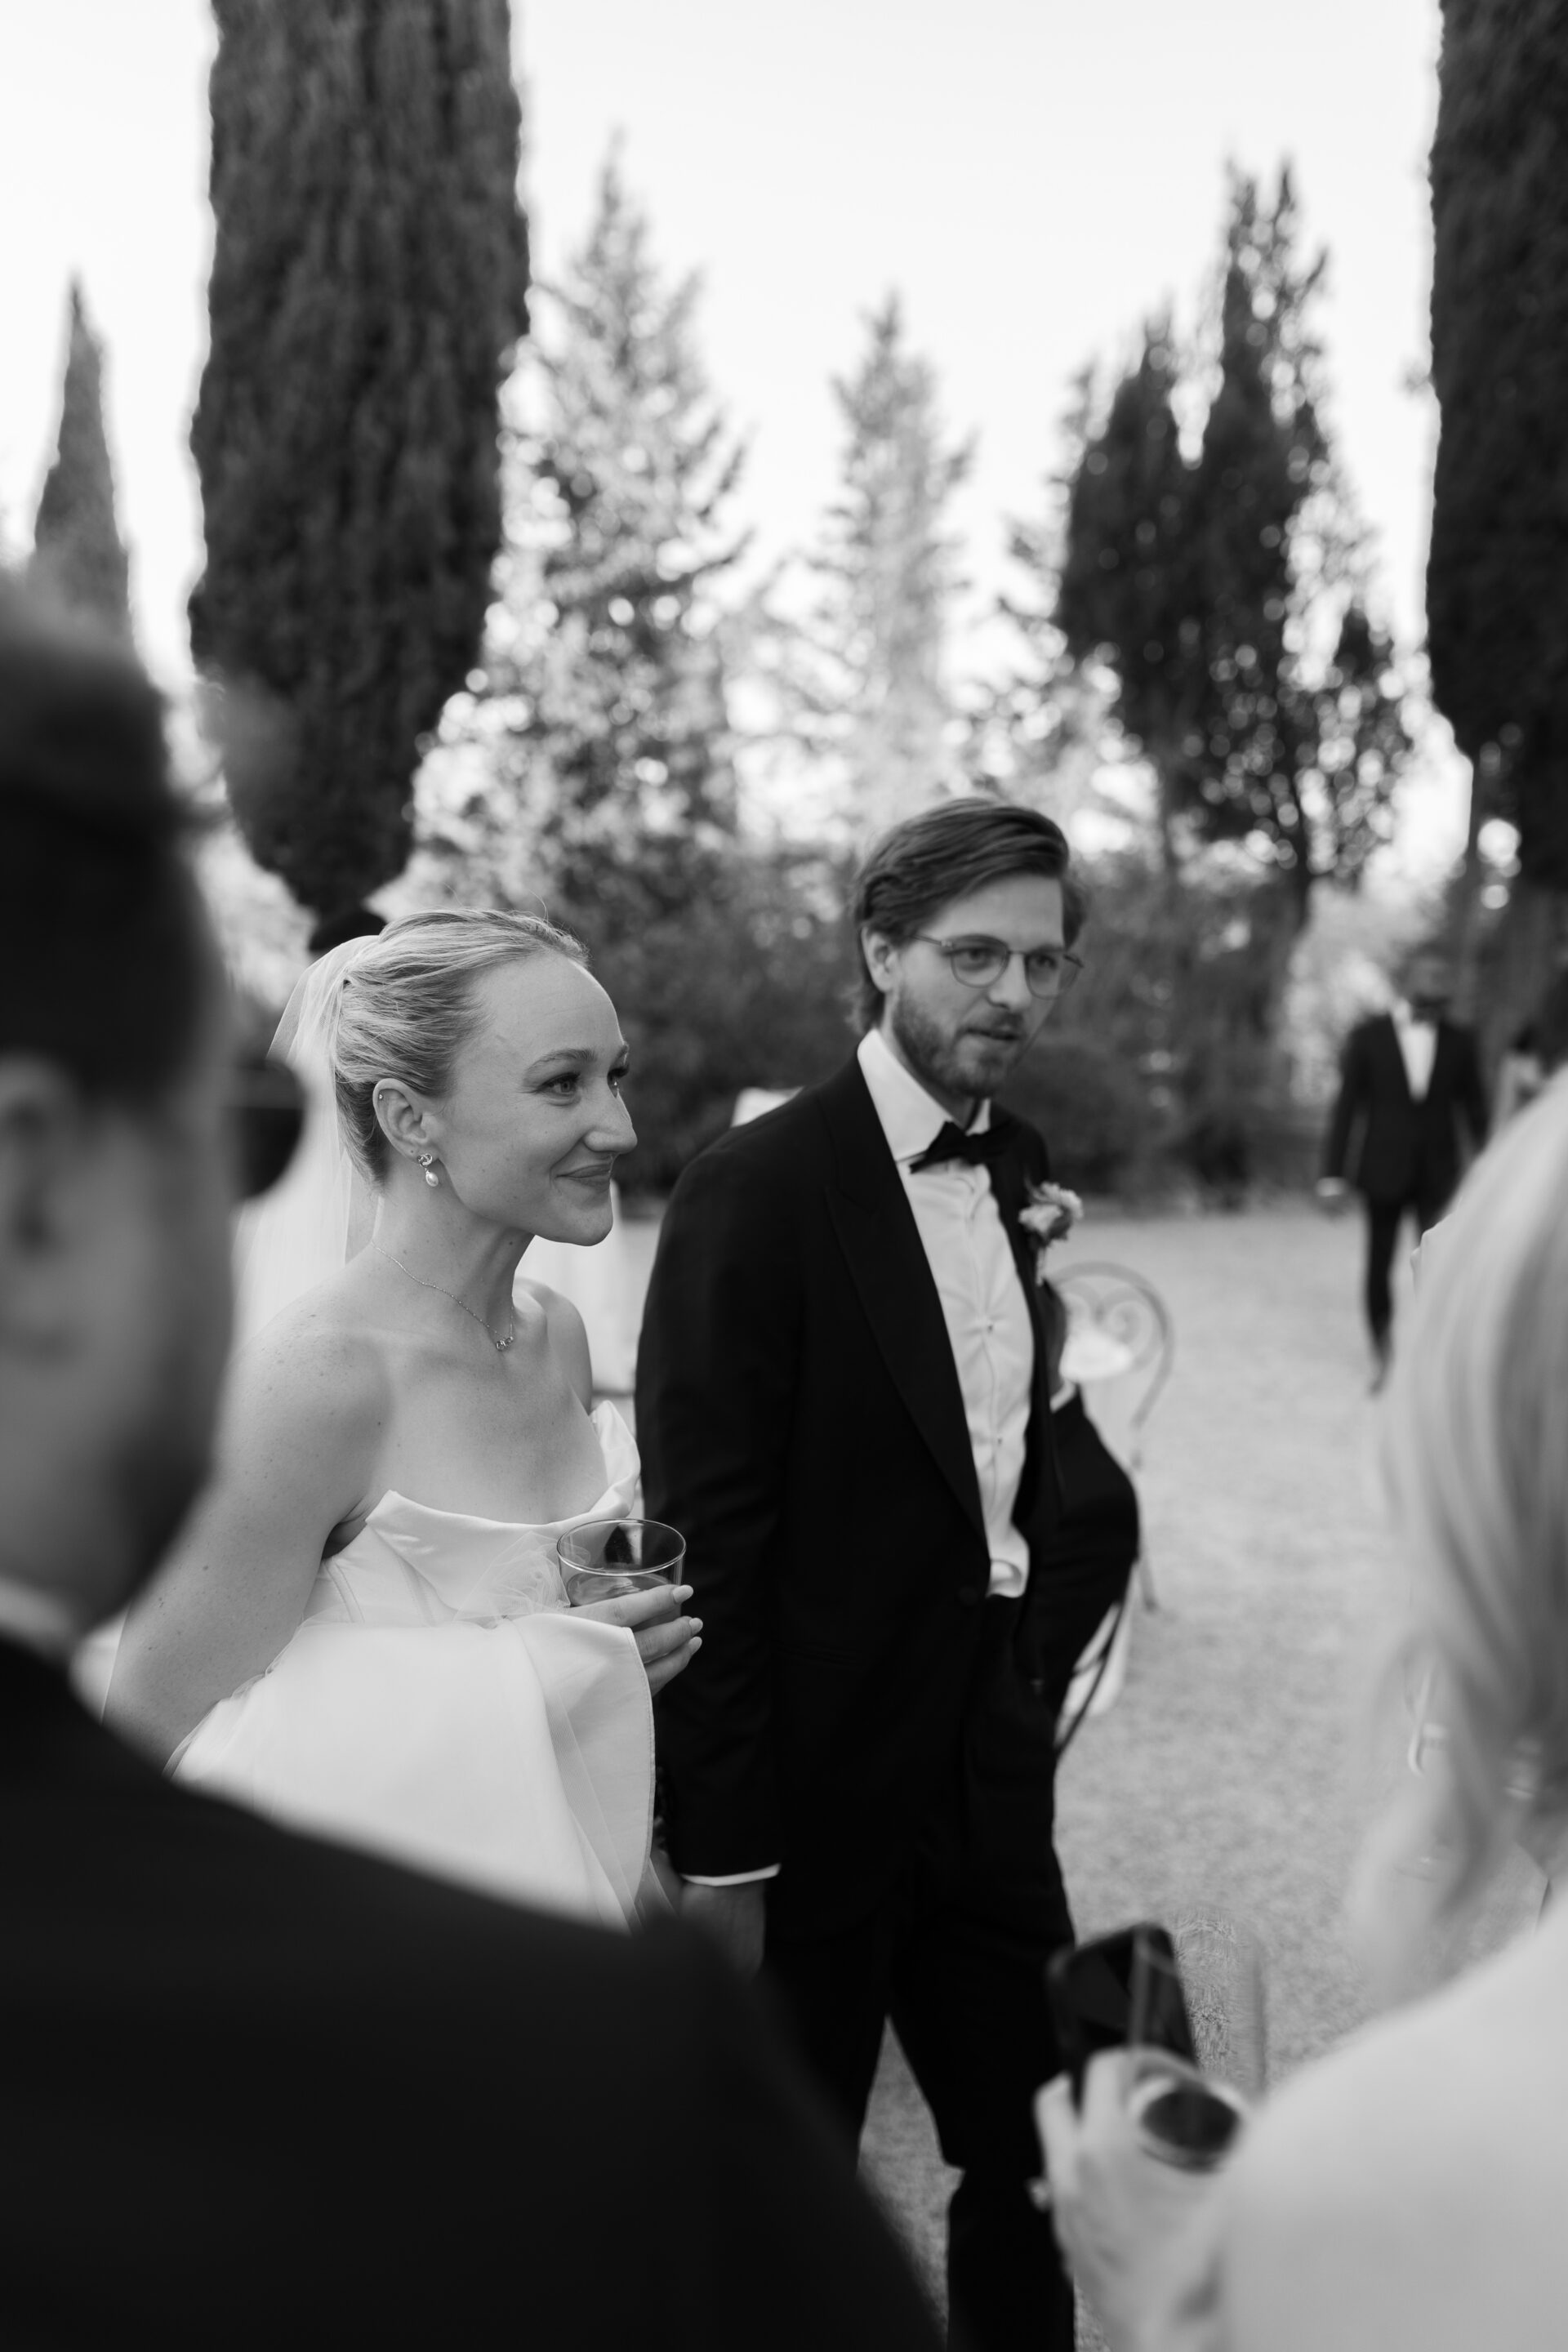 The bride and groom mingle with guests at Italian wedding reception in Italy